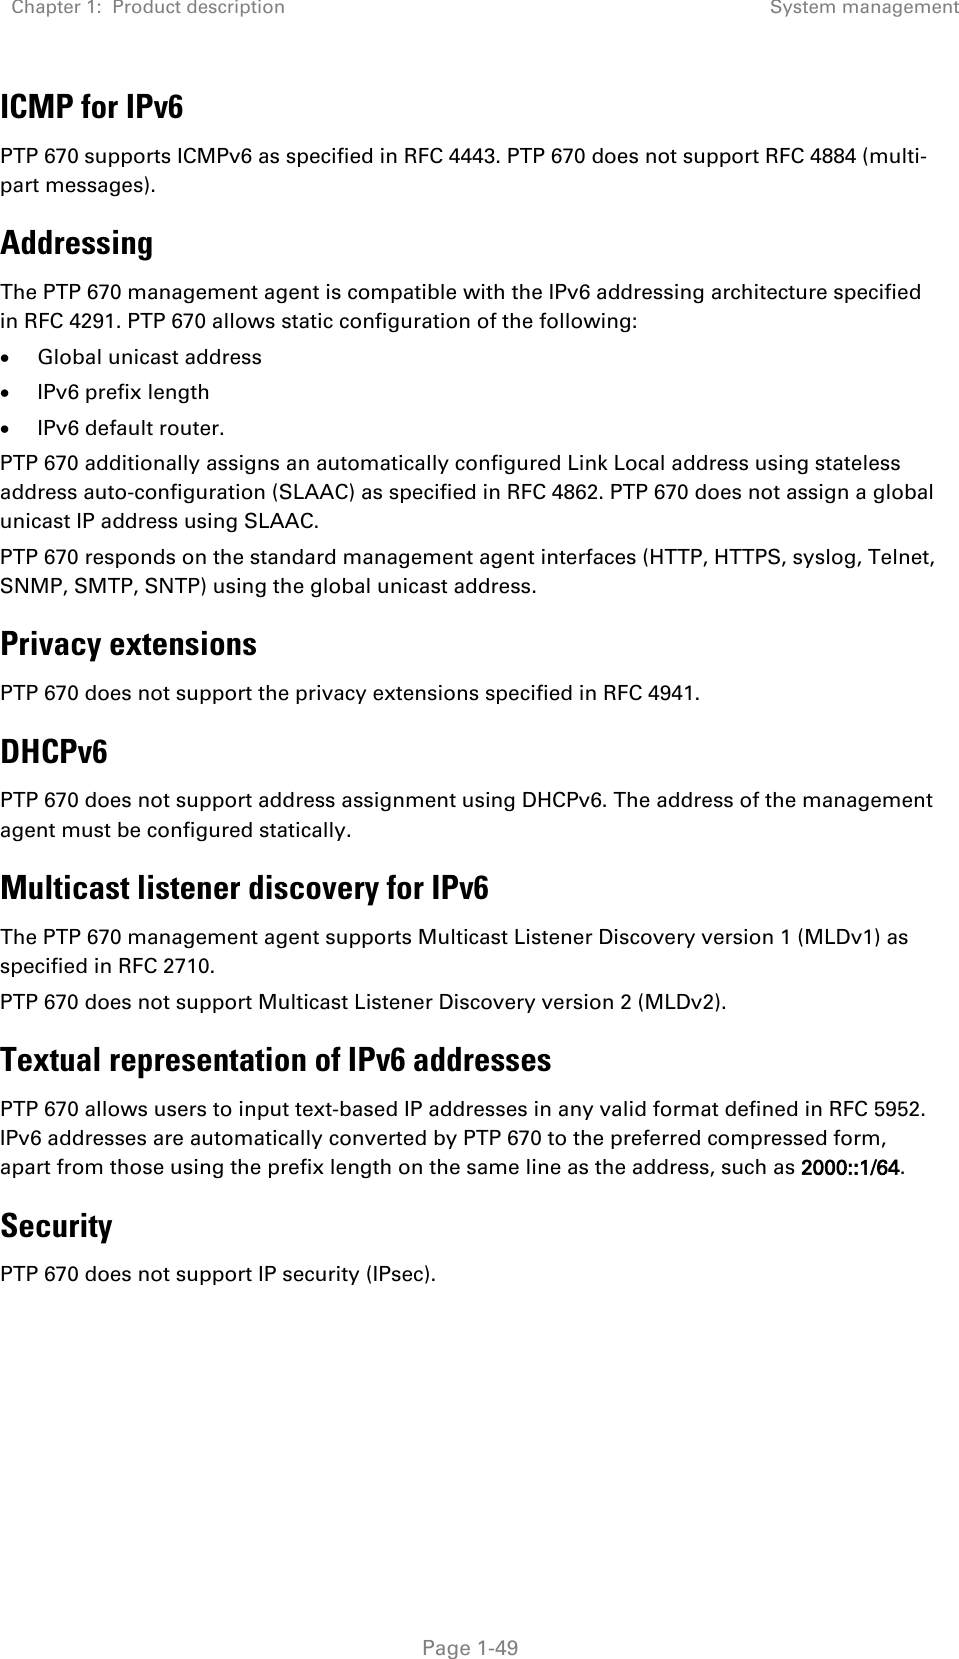 Chapter 1:  Product description  System management   Page 1-49 ICMP for IPv6 PTP 670 supports ICMPv6 as specified in RFC 4443. PTP 670 does not support RFC 4884 (multi-part messages). Addressing The PTP 670 management agent is compatible with the IPv6 addressing architecture specified in RFC 4291. PTP 670 allows static configuration of the following: • Global unicast address • IPv6 prefix length • IPv6 default router. PTP 670 additionally assigns an automatically configured Link Local address using stateless address auto-configuration (SLAAC) as specified in RFC 4862. PTP 670 does not assign a global unicast IP address using SLAAC. PTP 670 responds on the standard management agent interfaces (HTTP, HTTPS, syslog, Telnet, SNMP, SMTP, SNTP) using the global unicast address. Privacy extensions PTP 670 does not support the privacy extensions specified in RFC 4941. DHCPv6 PTP 670 does not support address assignment using DHCPv6. The address of the management agent must be configured statically. Multicast listener discovery for IPv6 The PTP 670 management agent supports Multicast Listener Discovery version 1 (MLDv1) as specified in RFC 2710. PTP 670 does not support Multicast Listener Discovery version 2 (MLDv2). Textual representation of IPv6 addresses PTP 670 allows users to input text-based IP addresses in any valid format defined in RFC 5952. IPv6 addresses are automatically converted by PTP 670 to the preferred compressed form, apart from those using the prefix length on the same line as the address, such as 2000::1/64. Security PTP 670 does not support IP security (IPsec).   